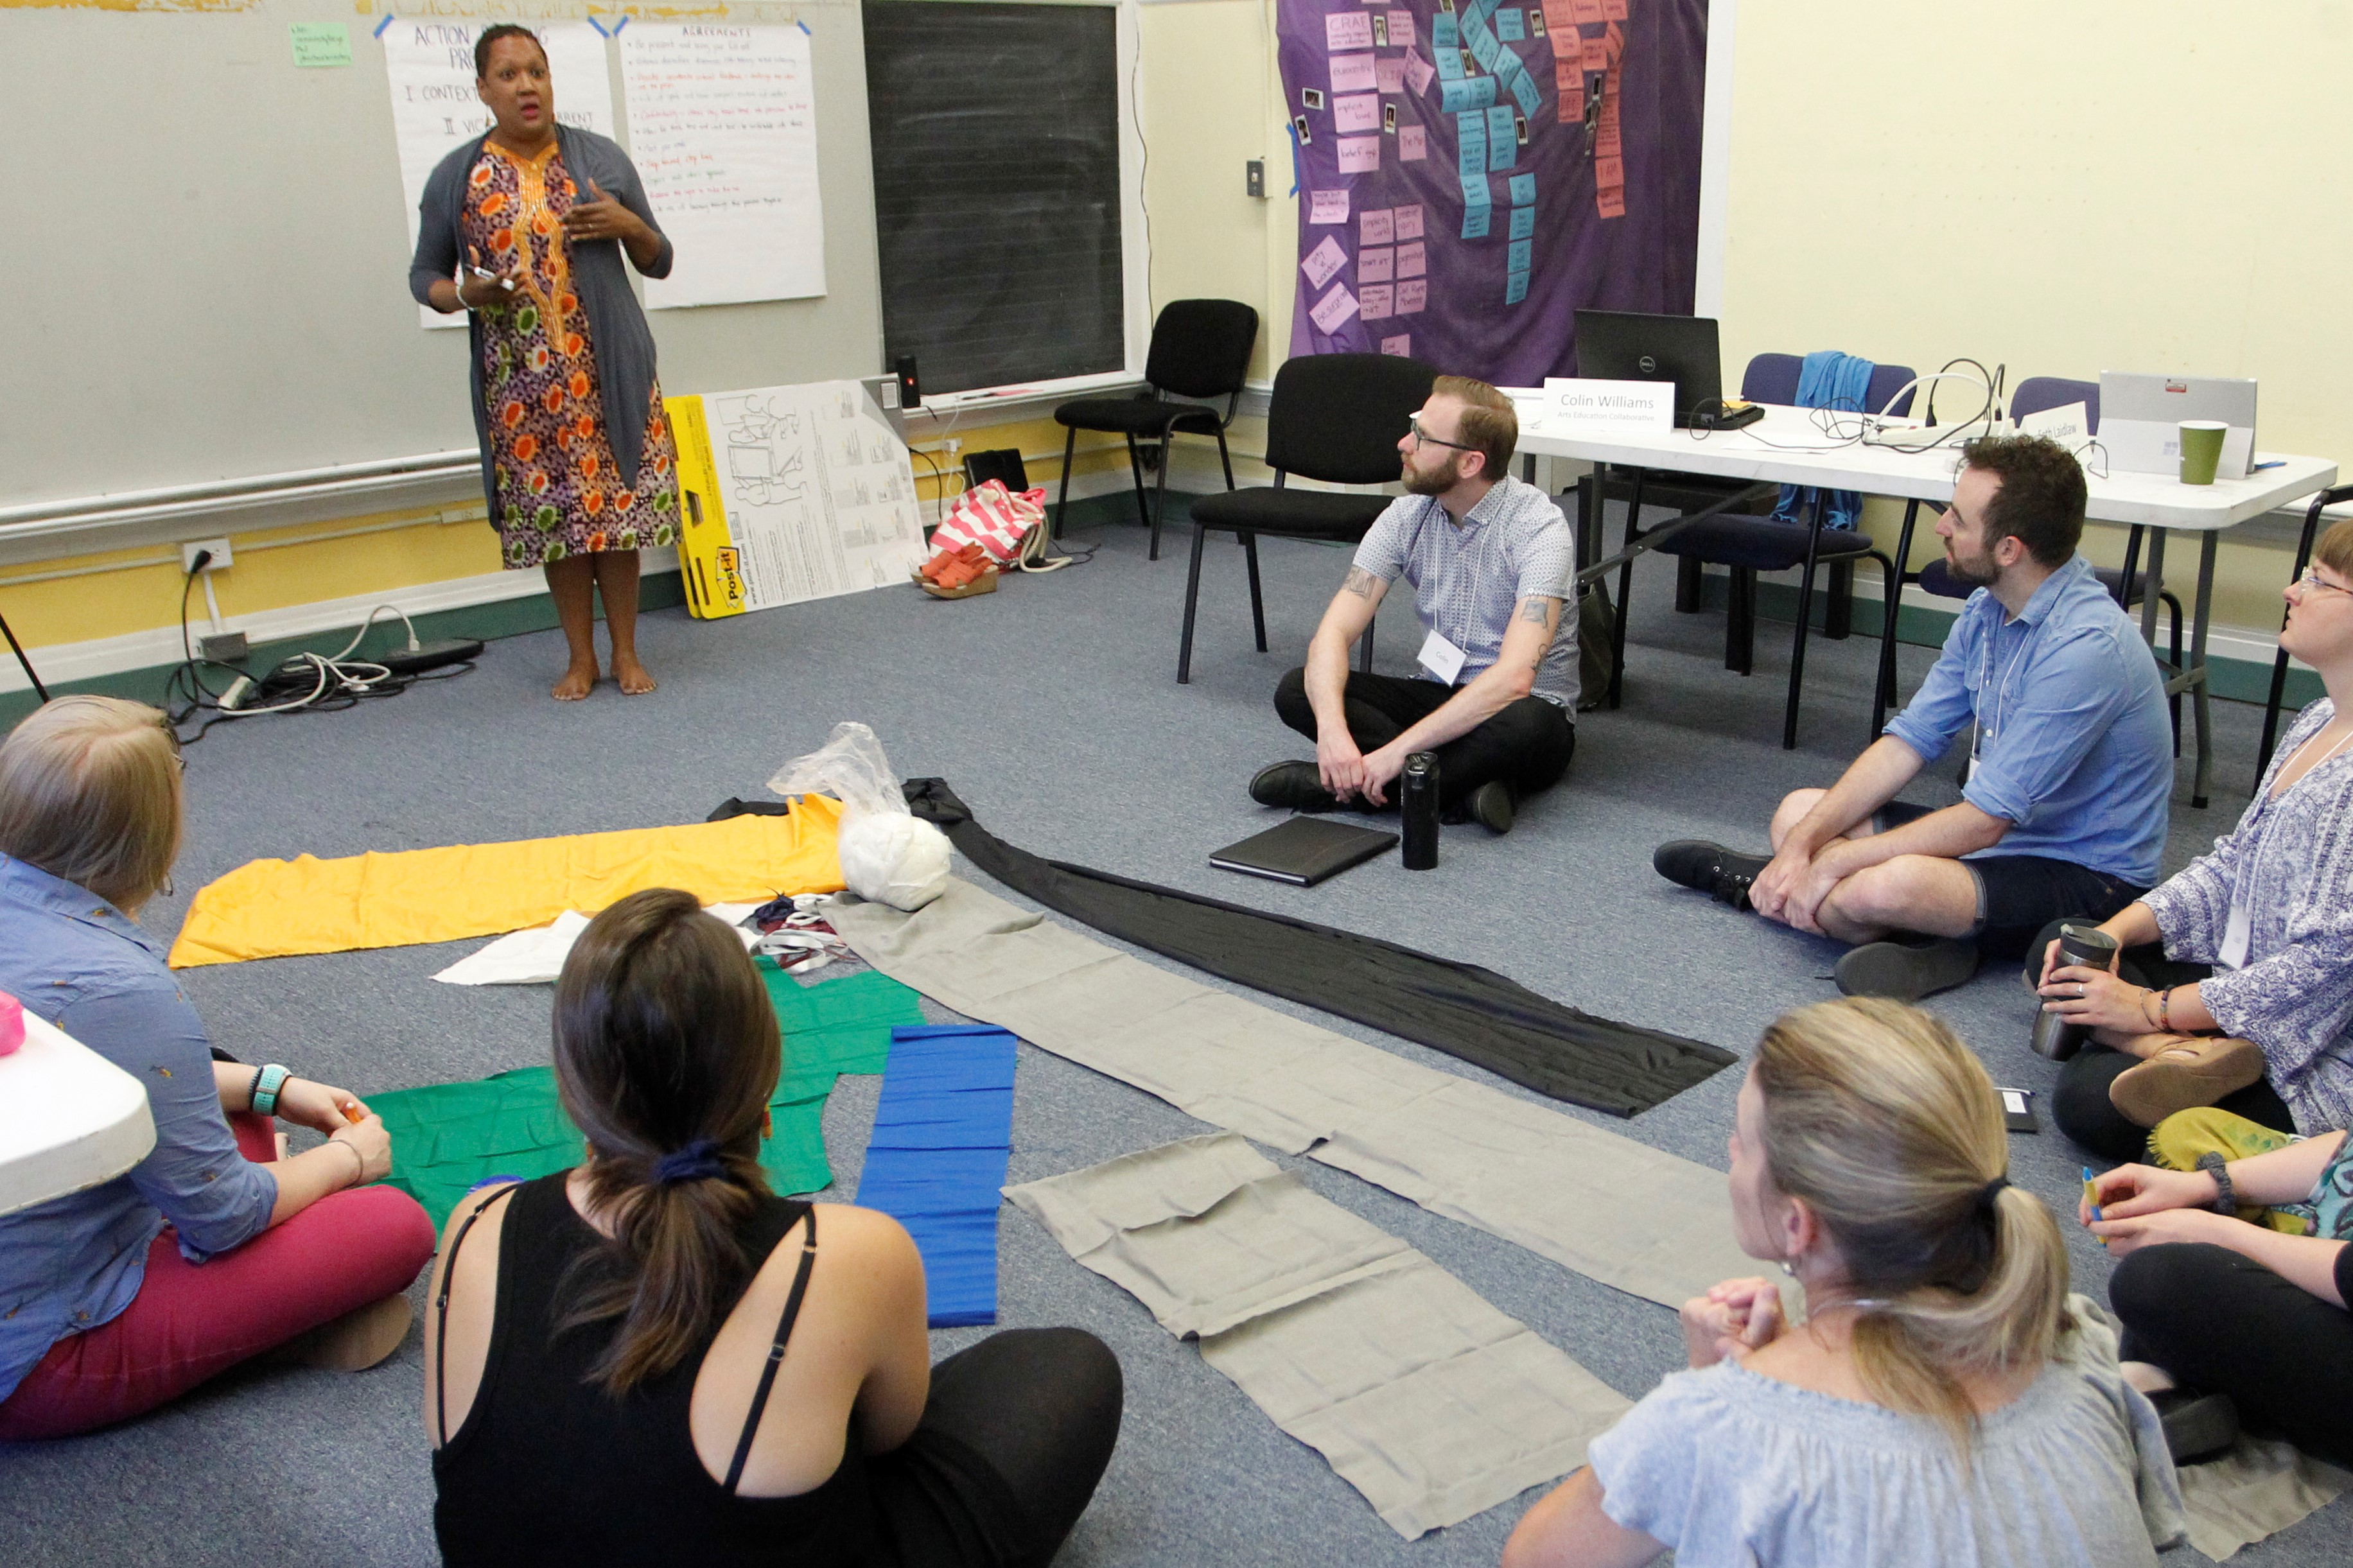 An educator facilitates an activity using colorful cloth with participants sitting on the floor in a circle.